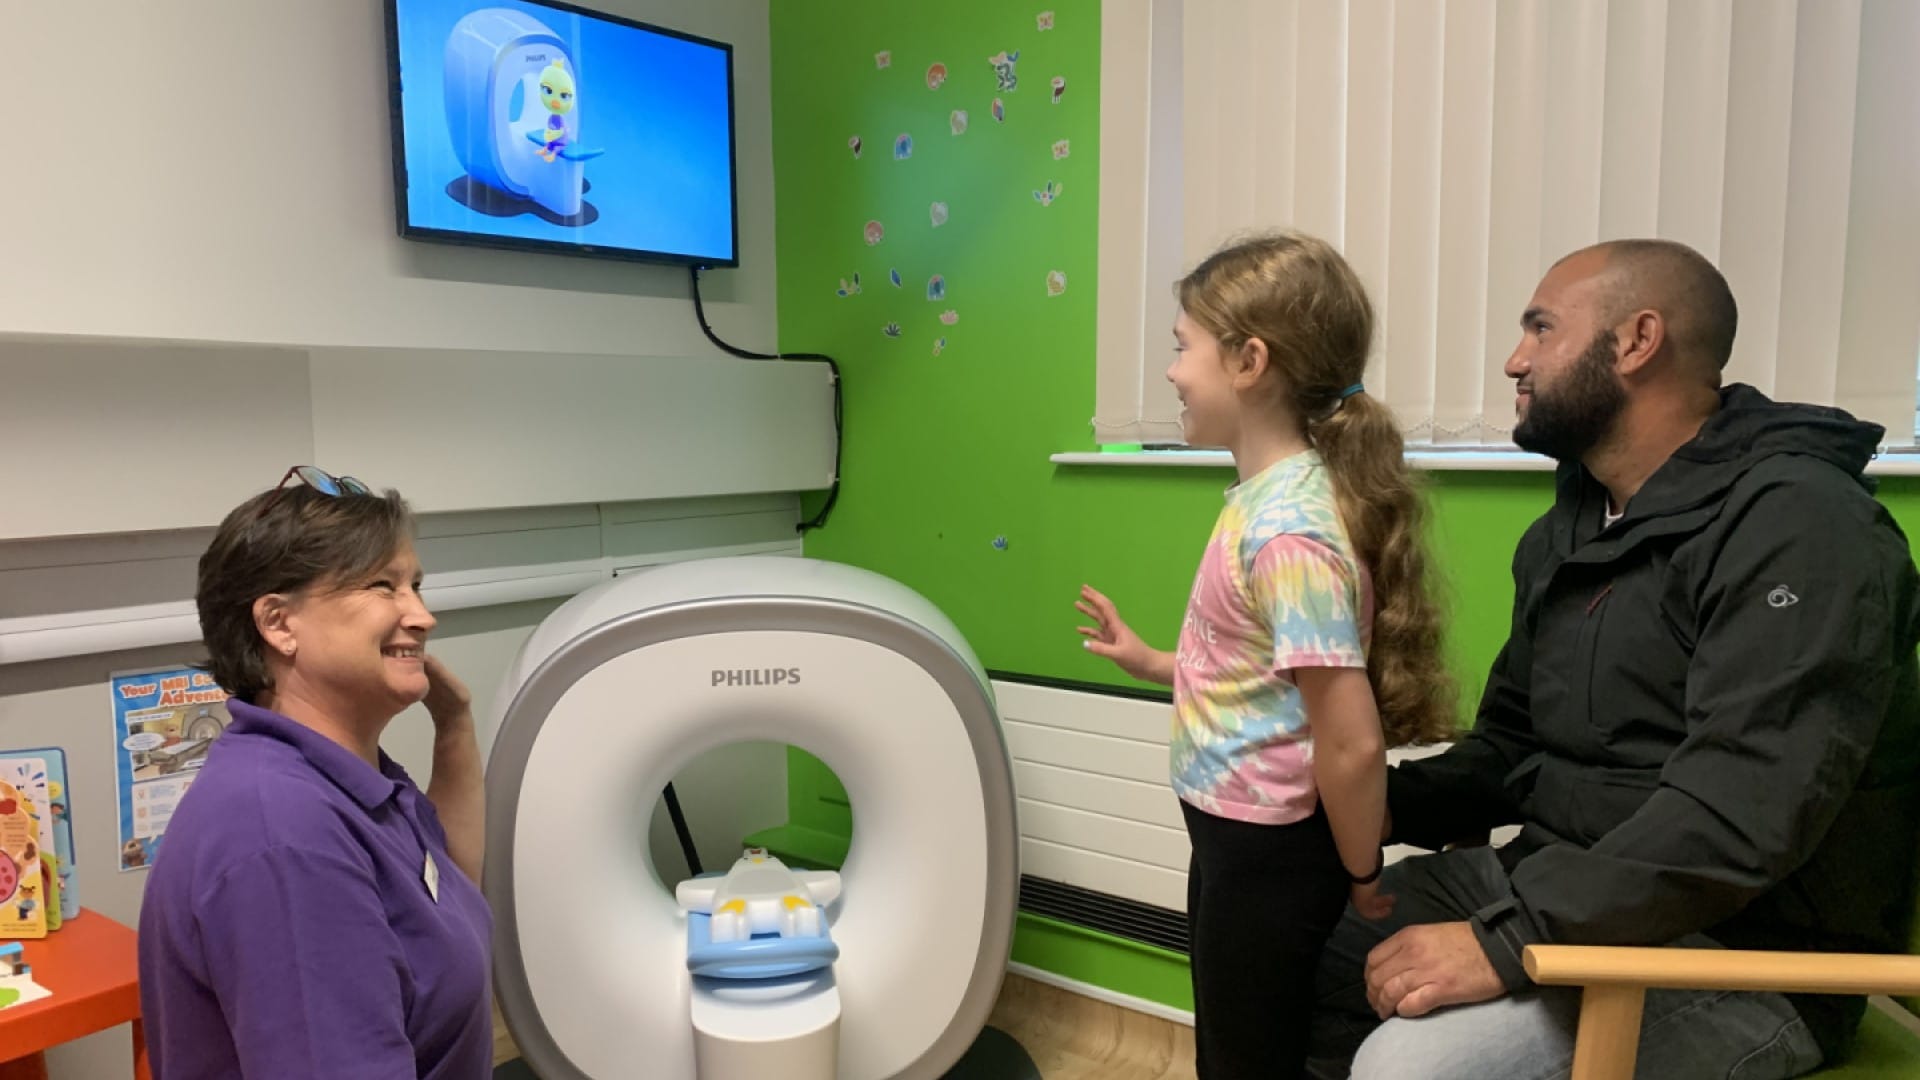 Philips Kitten Scanner helps children prepare for hospital scans at Grantham and District Hospital